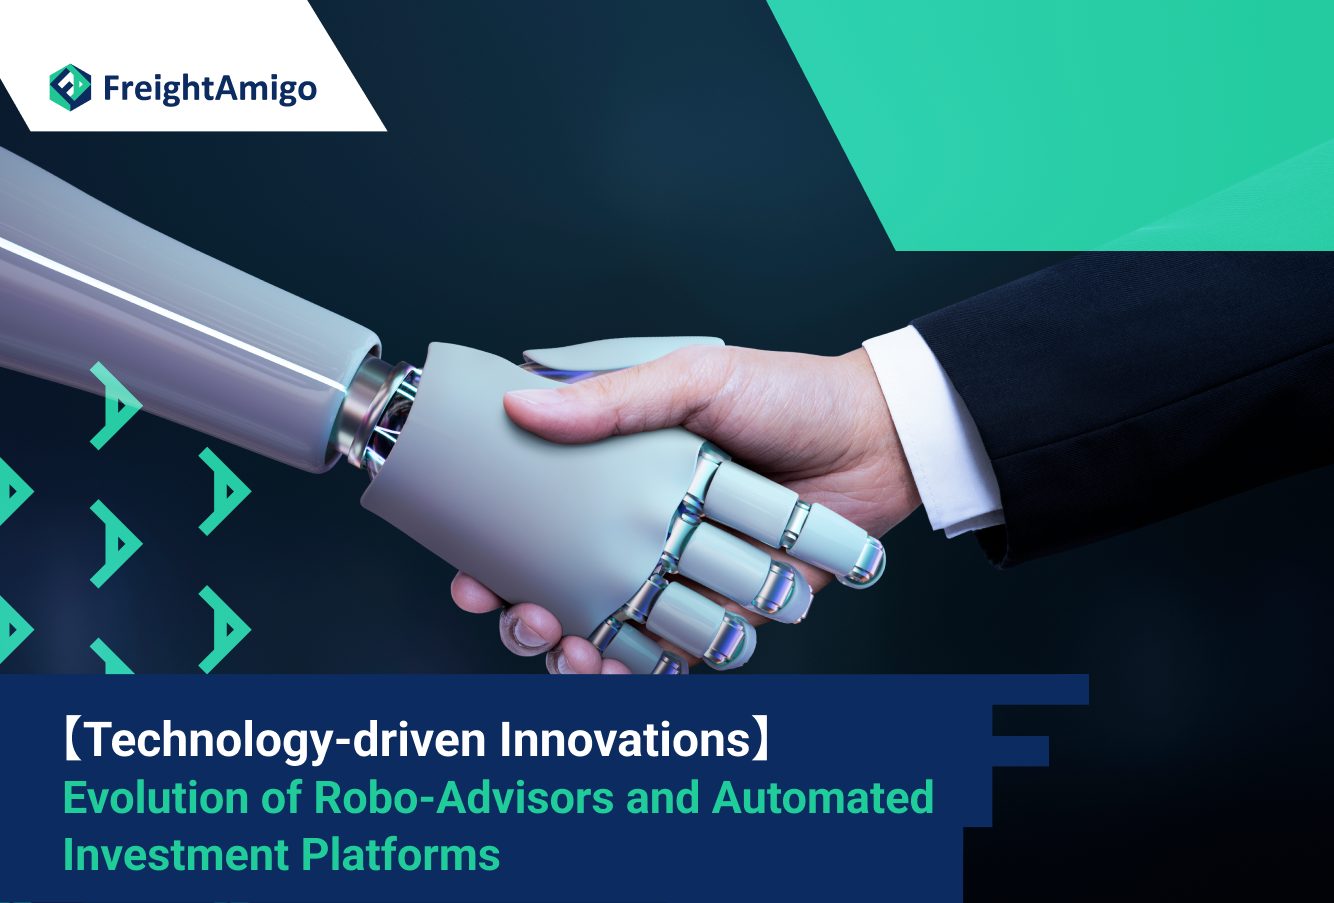 【Technology-driven Innovations】 The Evolution of Robo-Advisors and Automated Investment Platforms